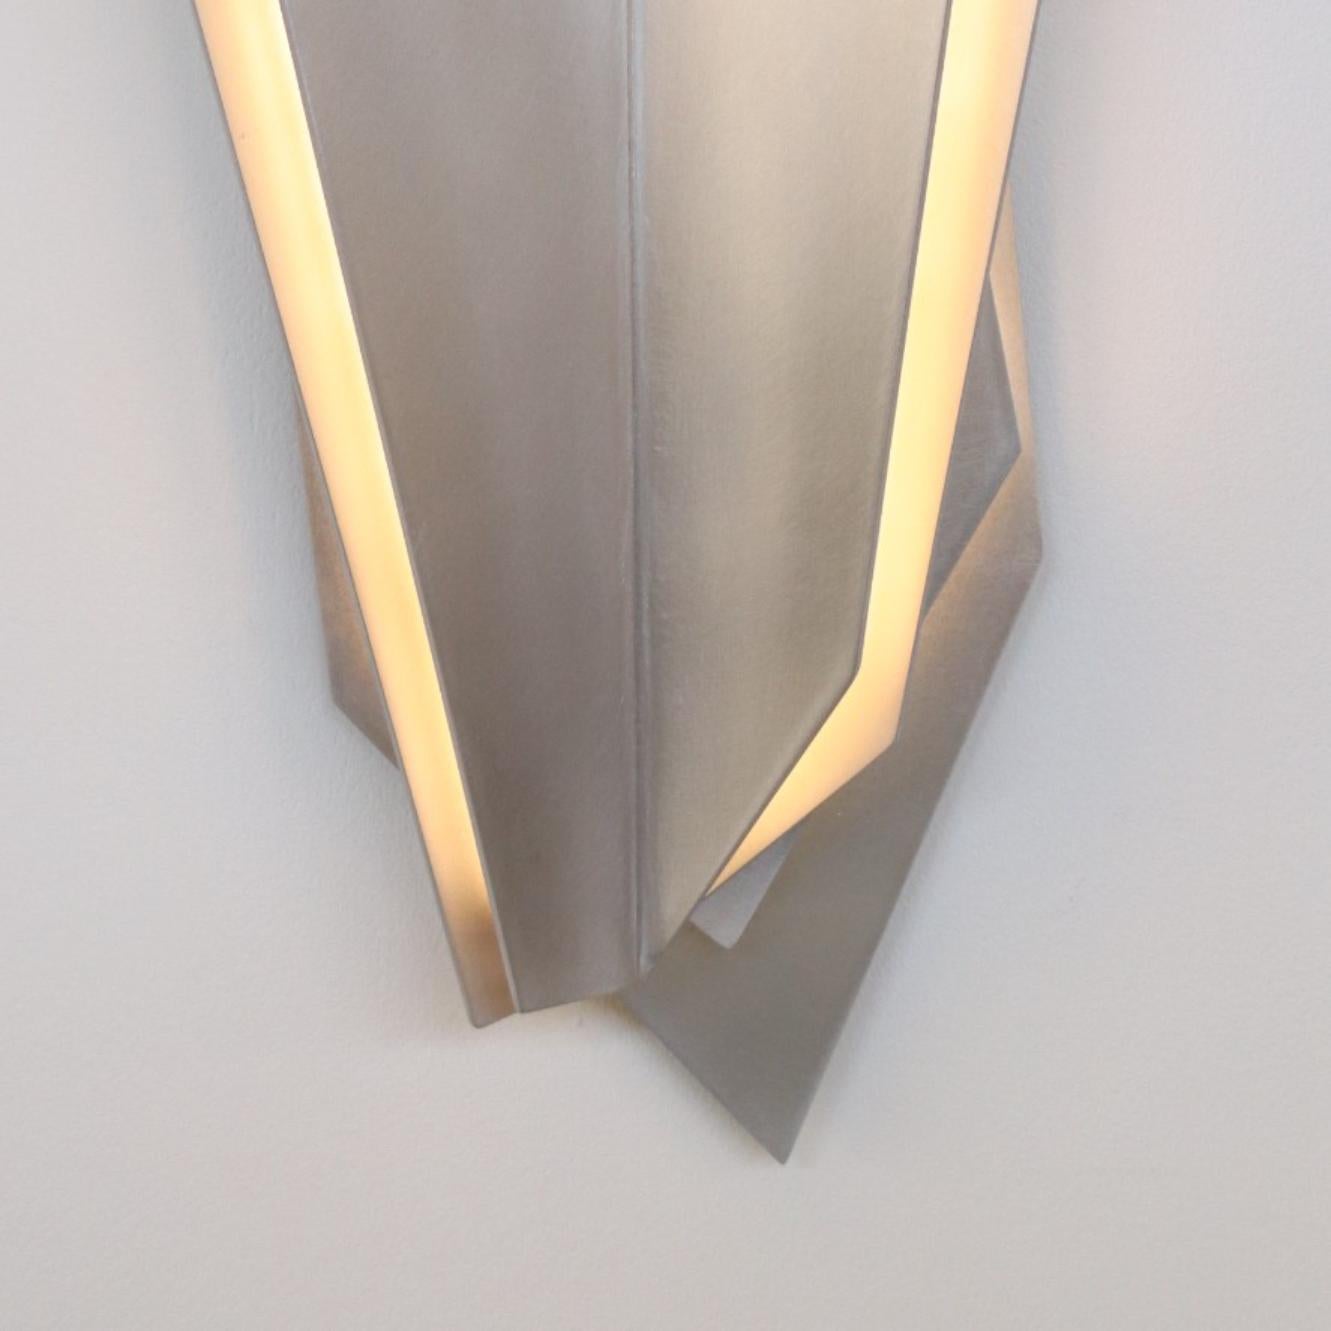 Other Continuum 500 Wall Sconce by Lost Profile Studio For Sale